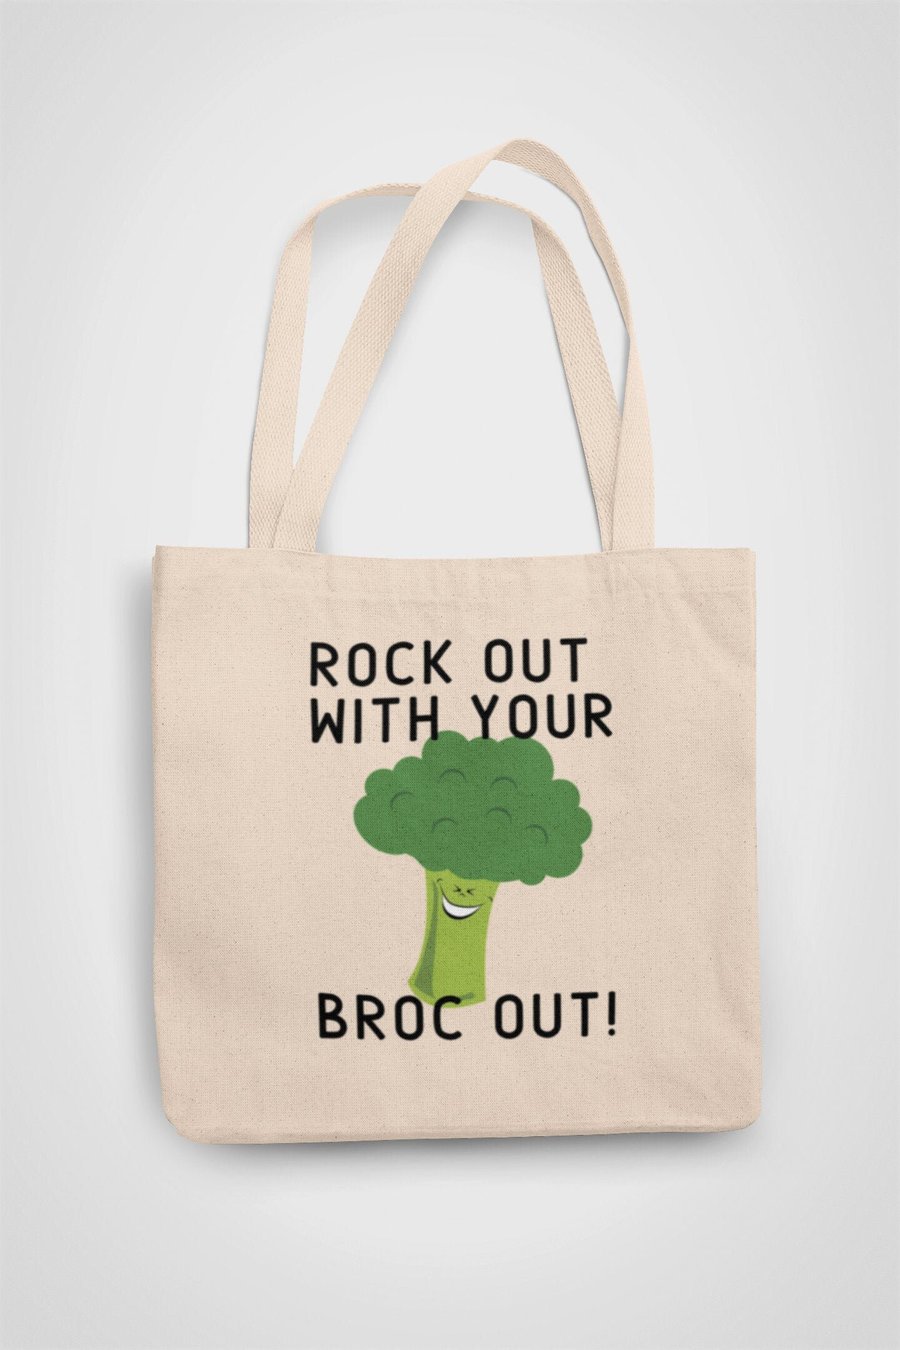 Rock out with your Brock Out Tote Bag Reusable Cotton bag - funny adult birthday